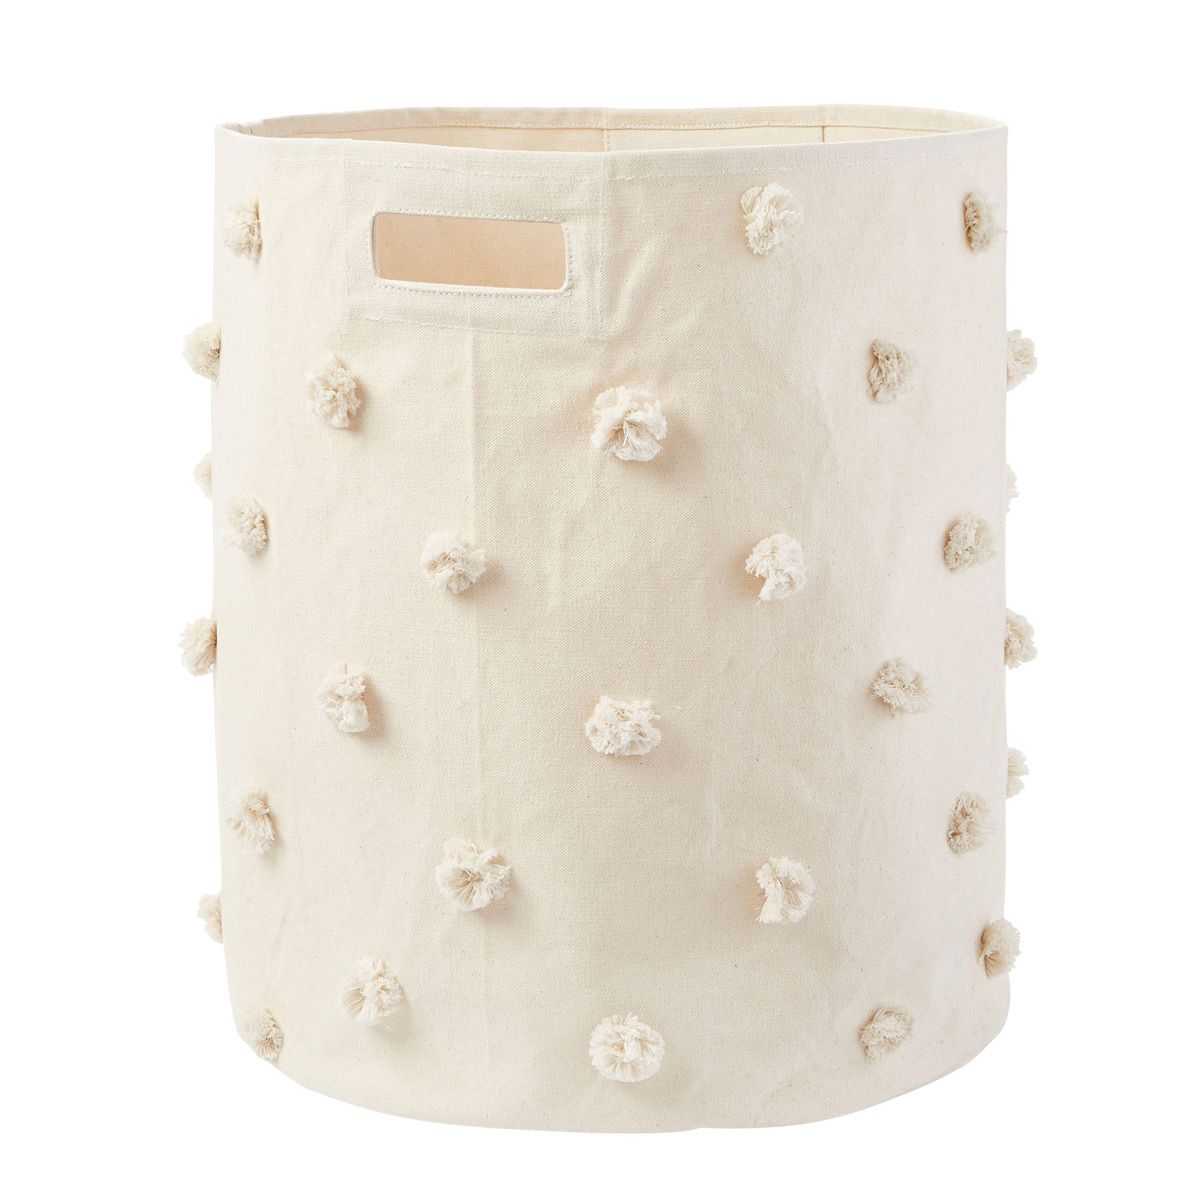 Pehr Pom Pom Laundry Hamper | The Container Store